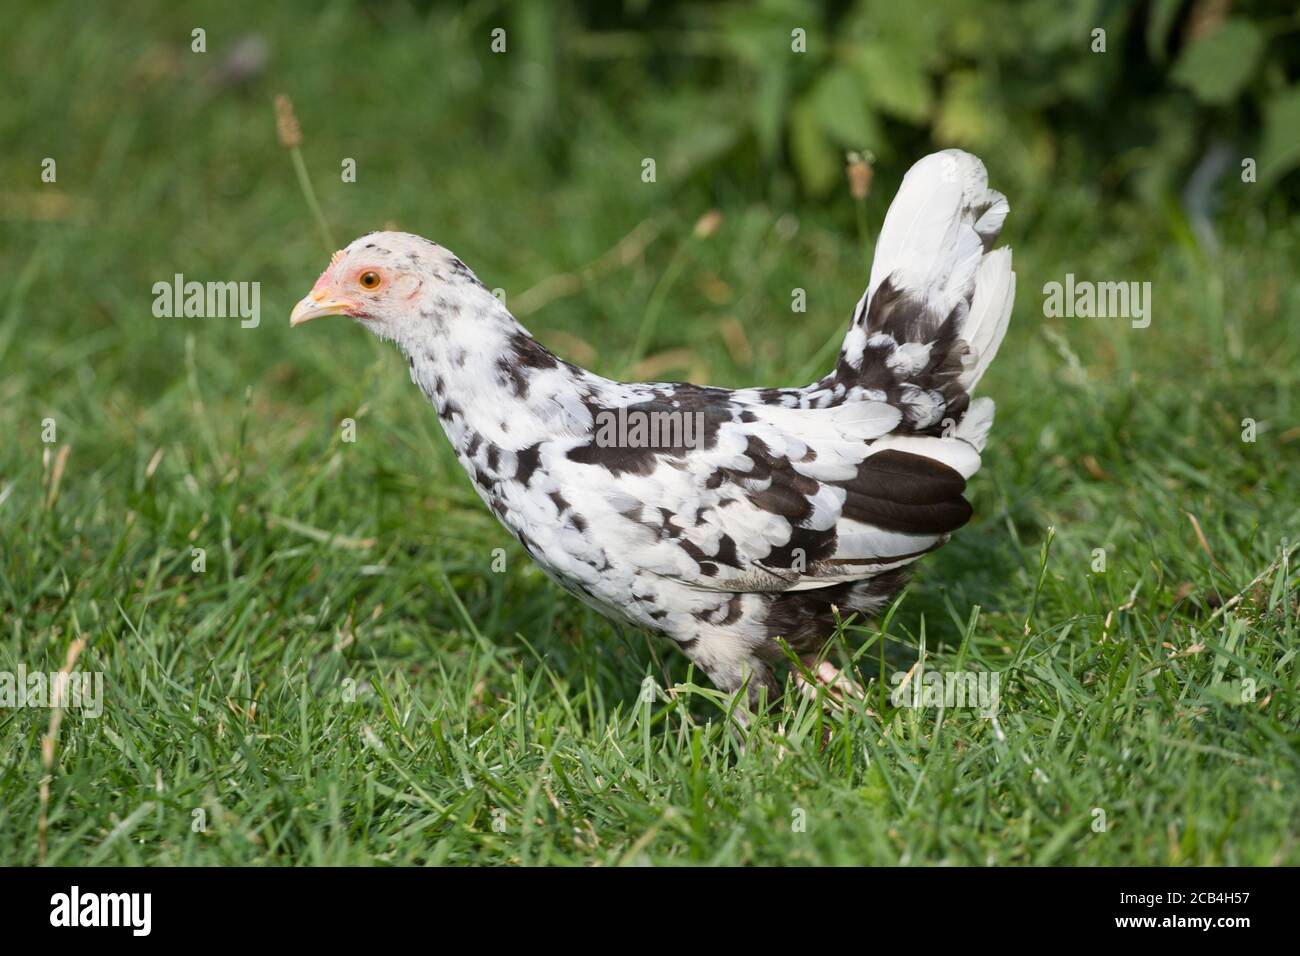 Colorful young chicken hen of the breed "Stoapiperl", an endangered breed from Austria Stock Photo